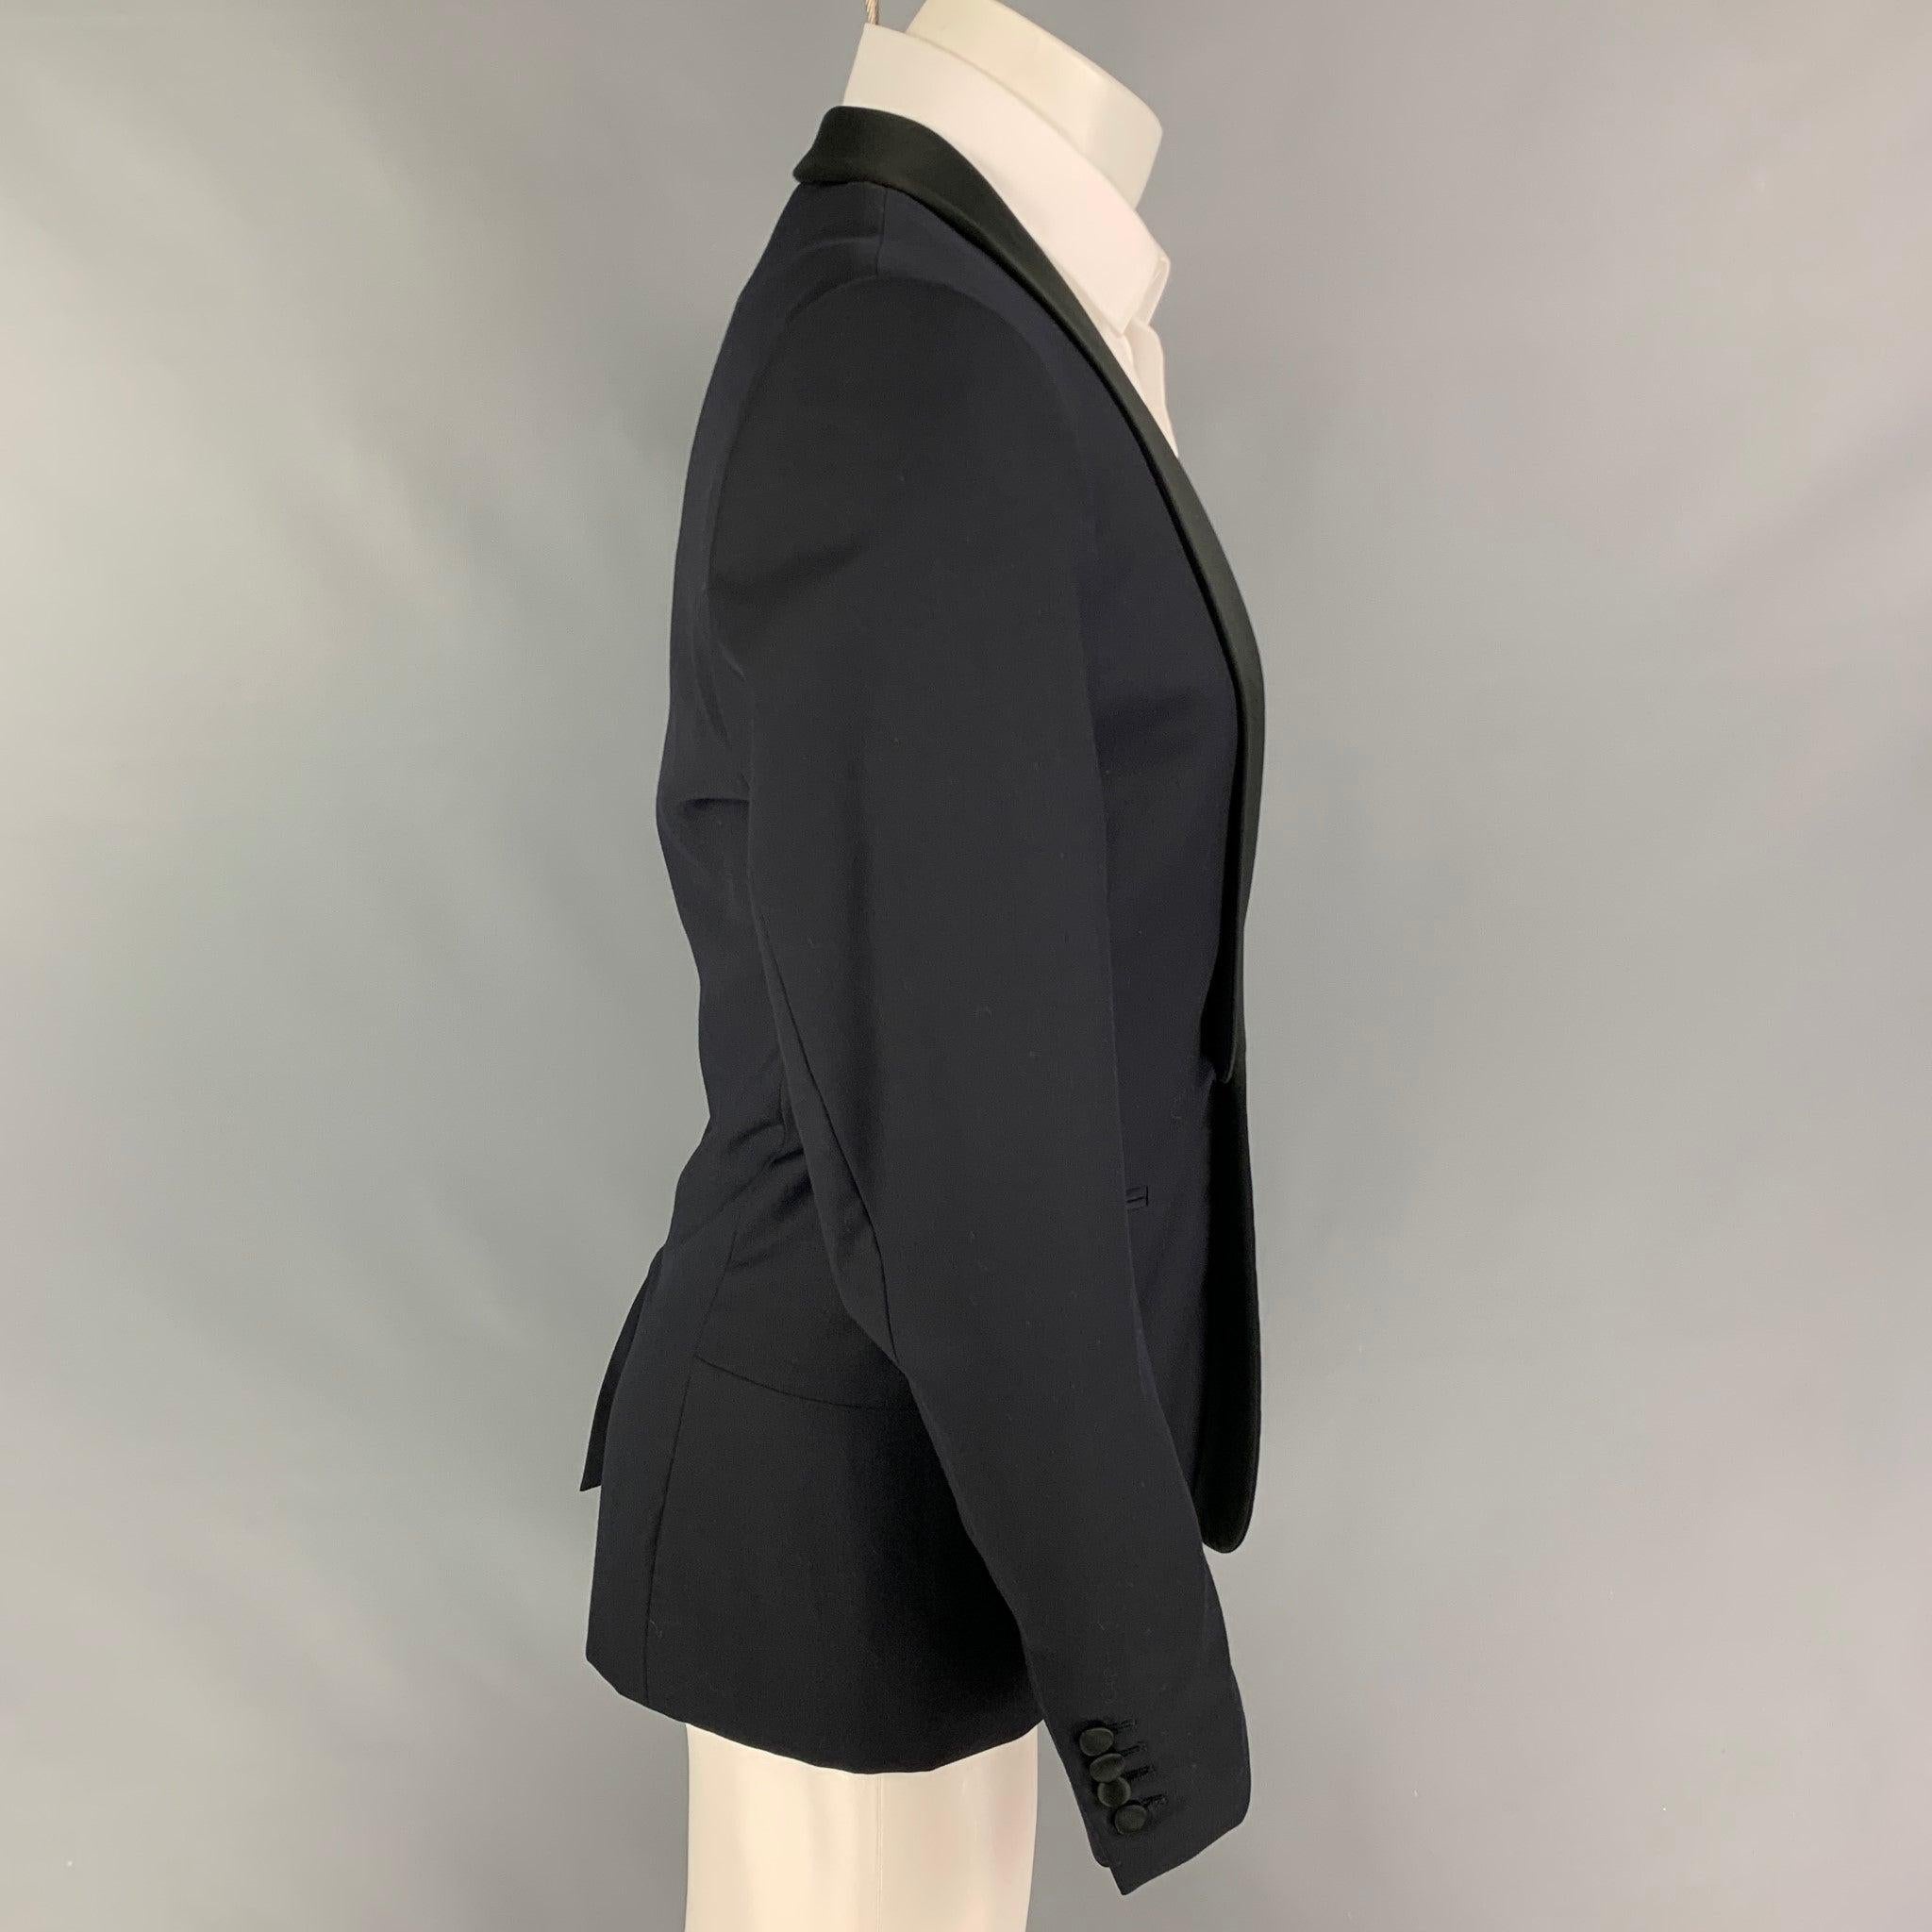 SANDRO sport coat comes in a black wool with a full liner featuring a shawl collar, slit pockets, single back vent, and a single button closure.
Very Good
Pre-Owned Condition. 

Marked:   48 

Measurements: 
 
Shoulder: 17.5 inches  Chest: 38 inches